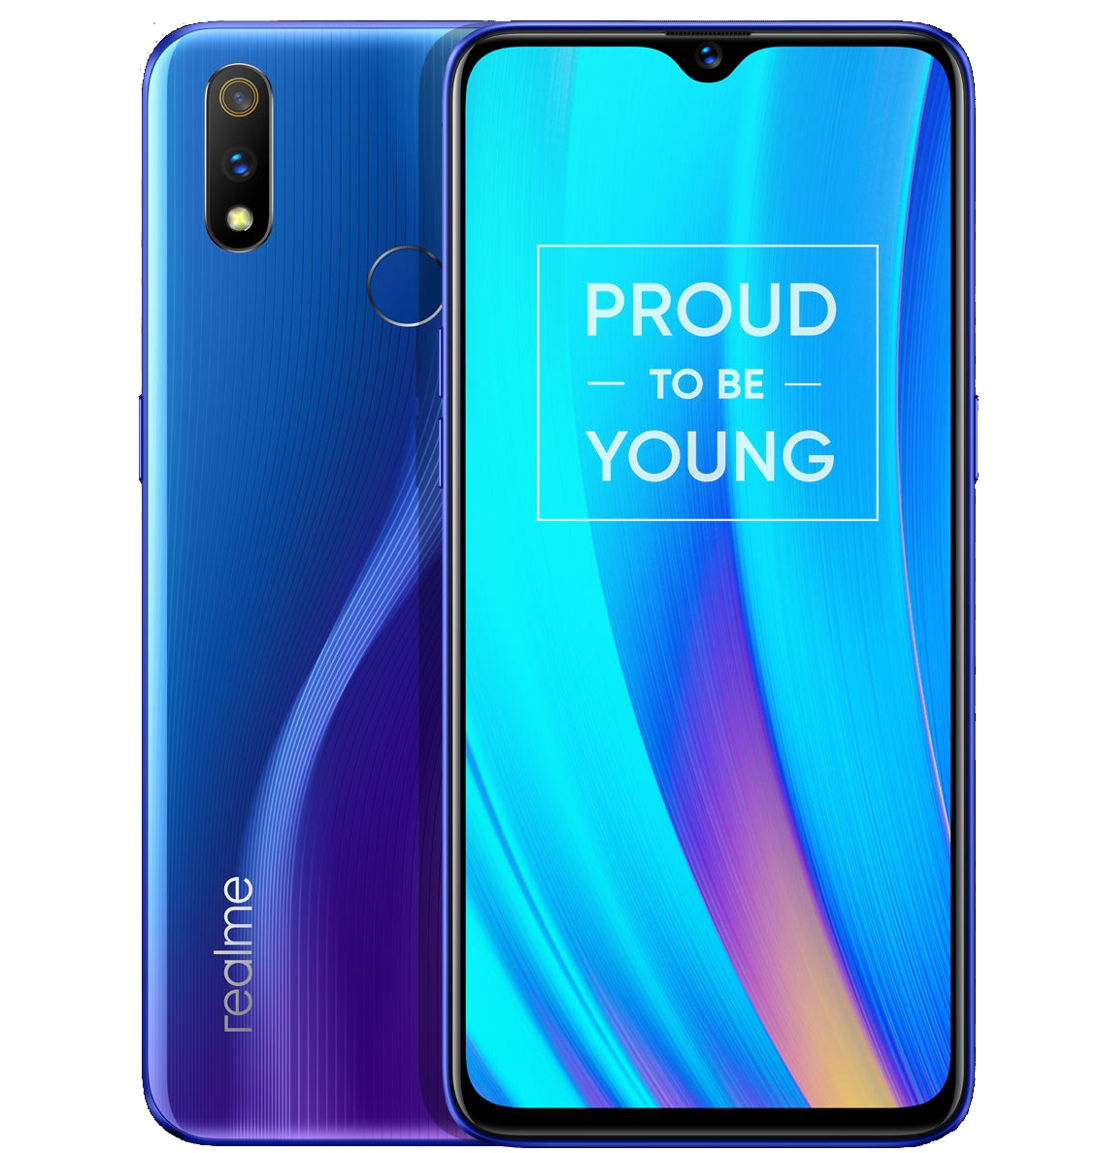 Realme 3 Pro Launched